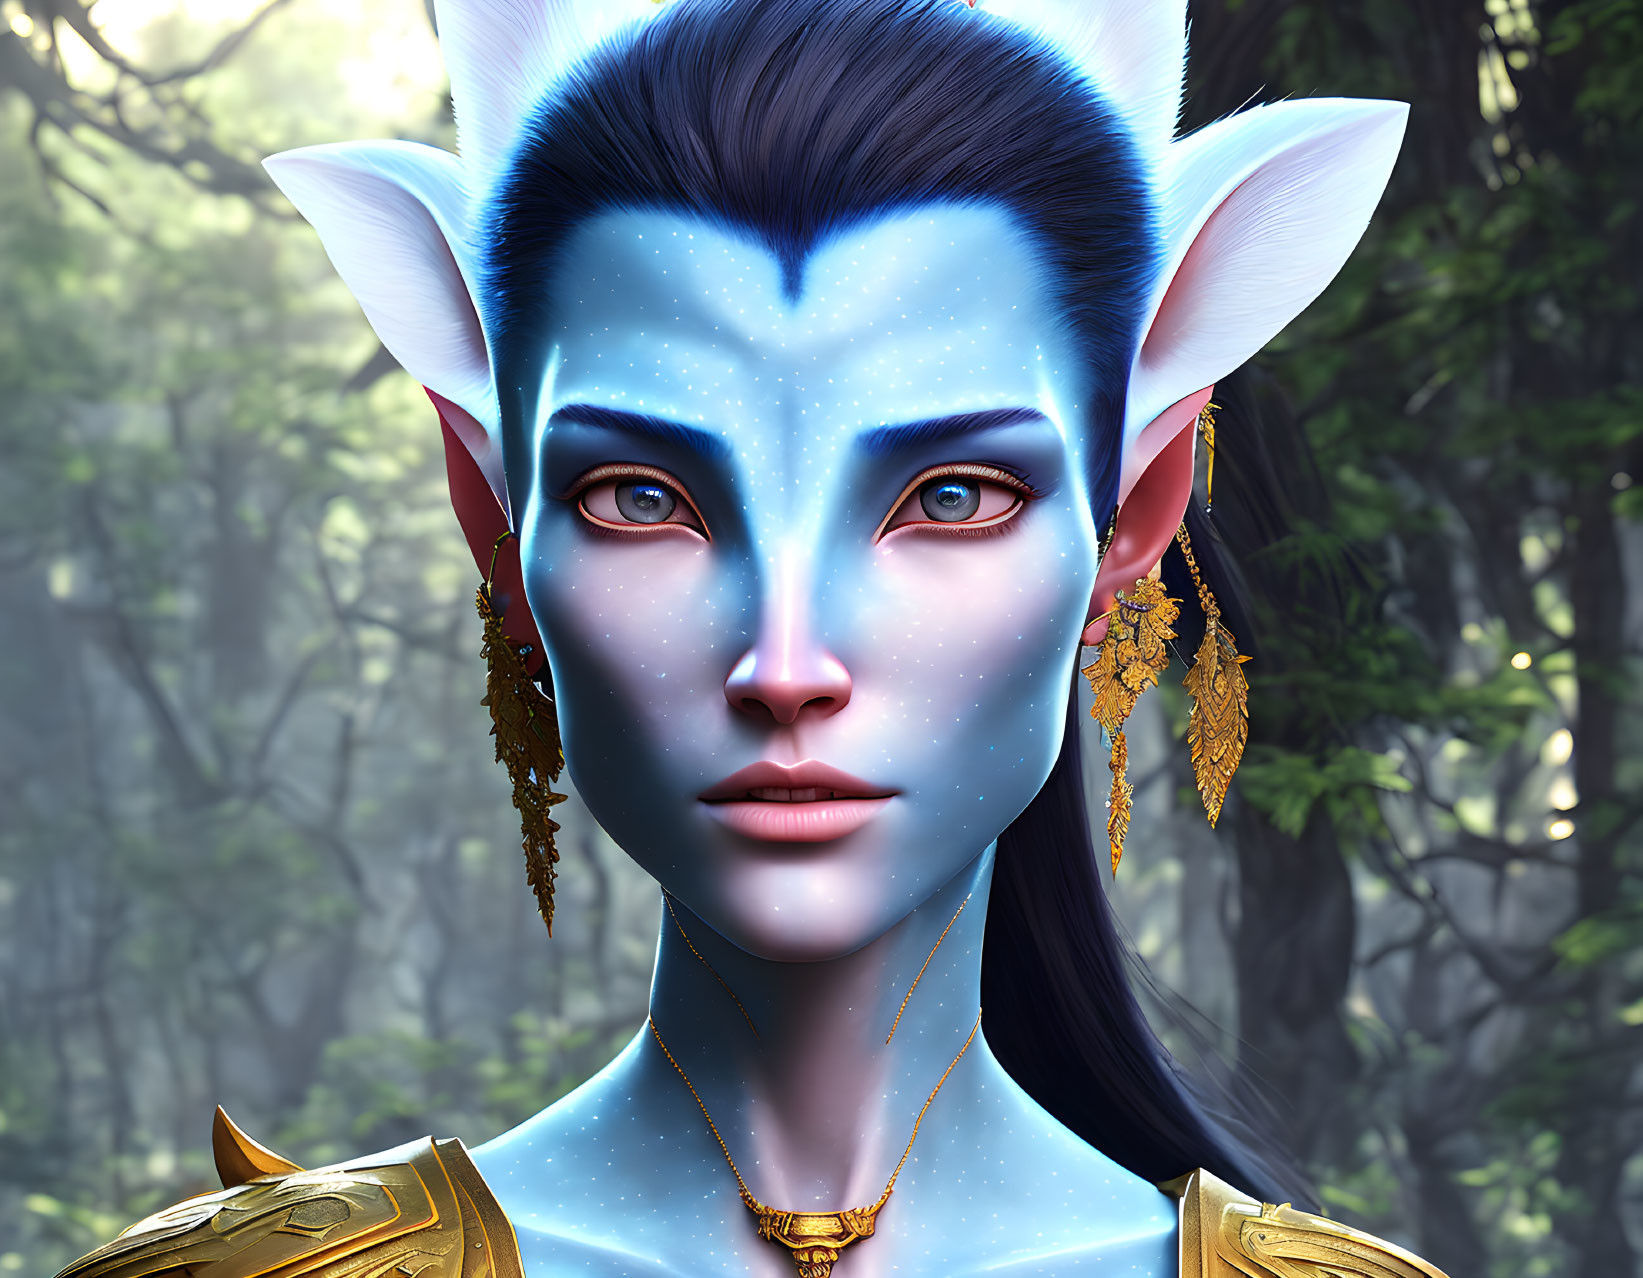 Blue-skinned female character with pointed ears and star-like freckles in forest setting.